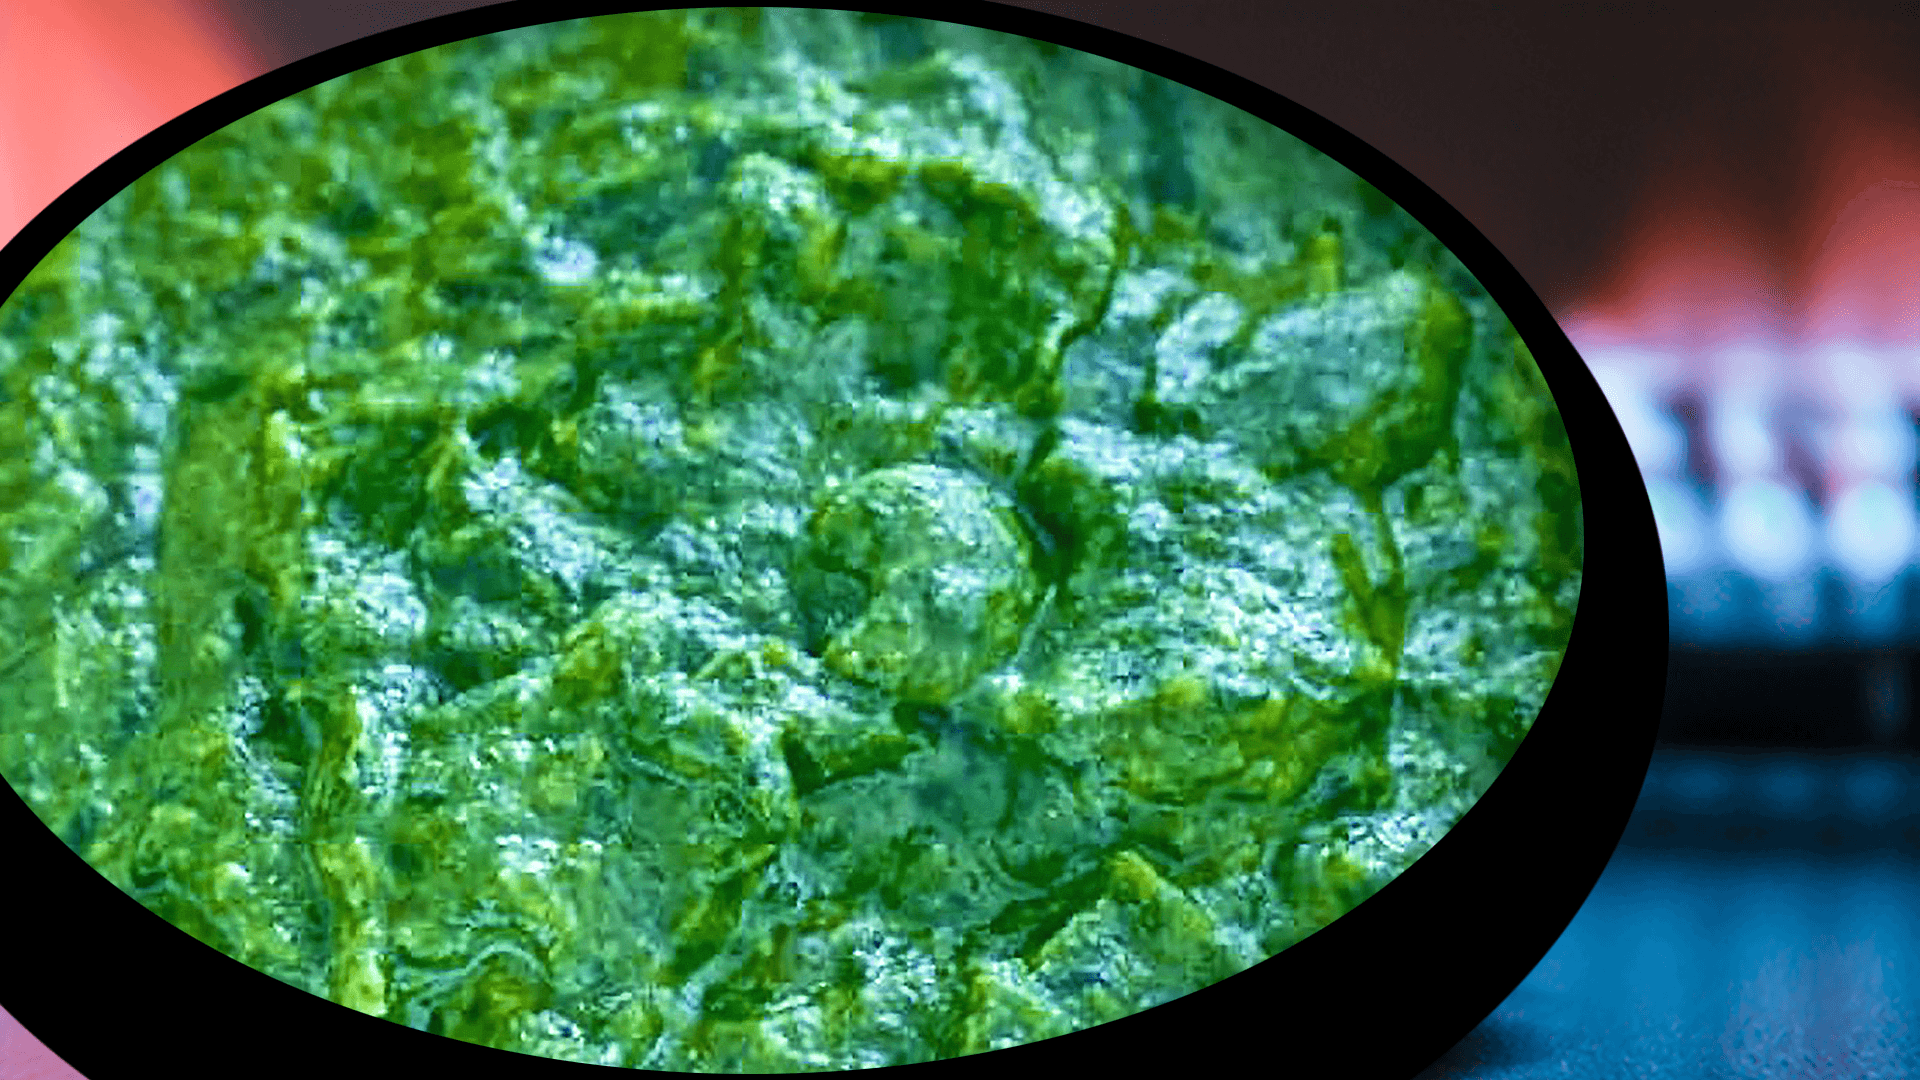 Cooking Creamed Spinach with Milk